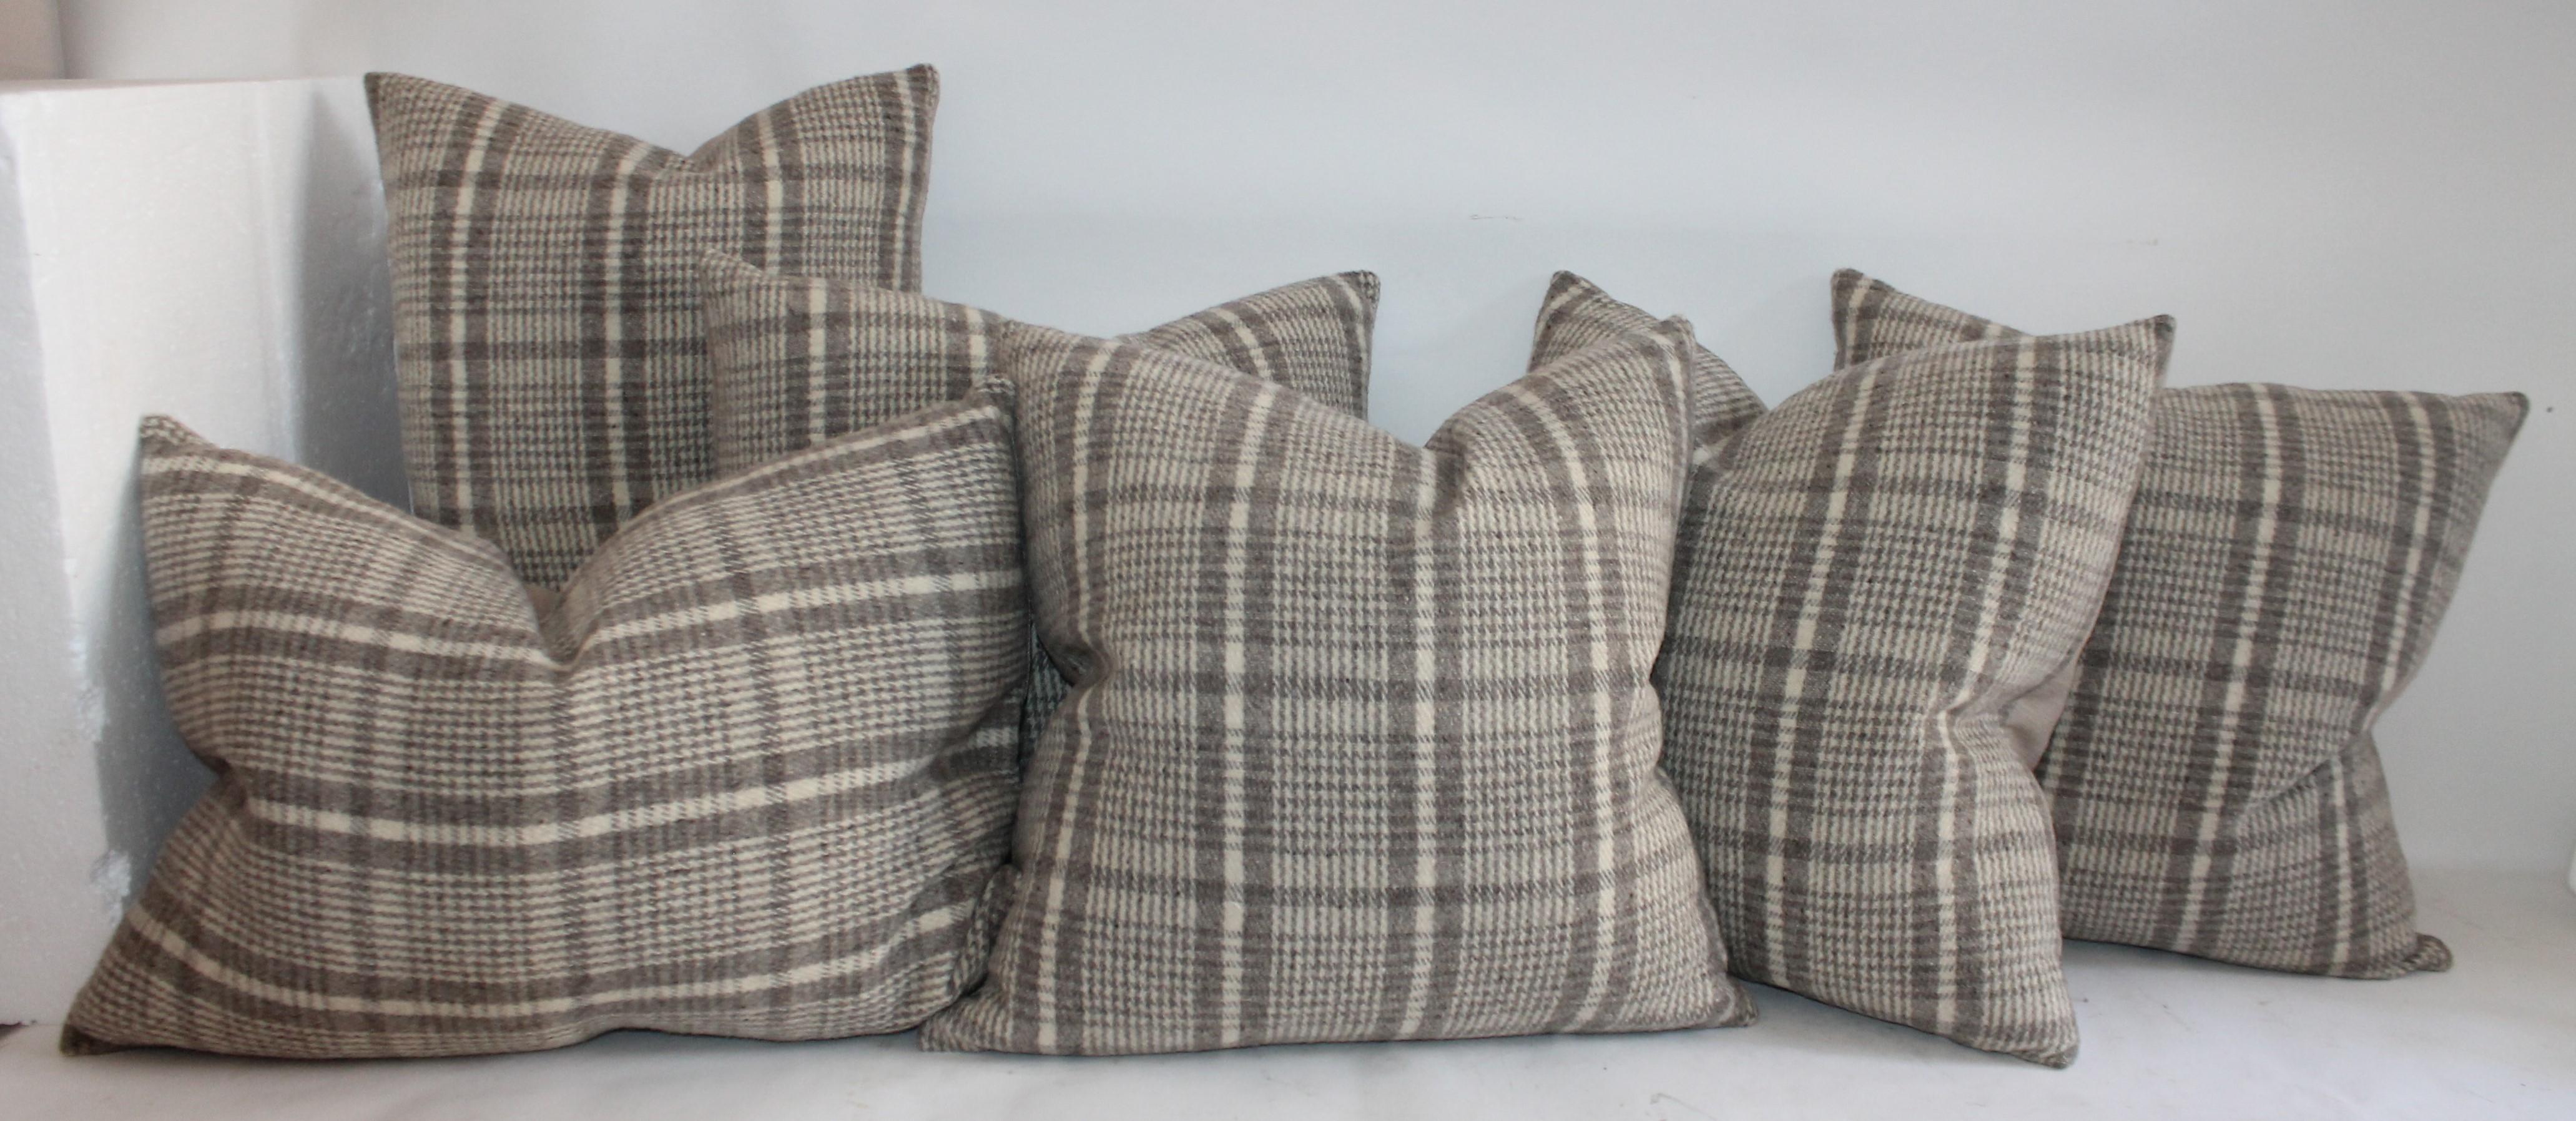 Collection of wool plaid pillows in pairs. Cotton linen backing on pillows. Three pairs of pillows. These are made from a handwoven poncho.